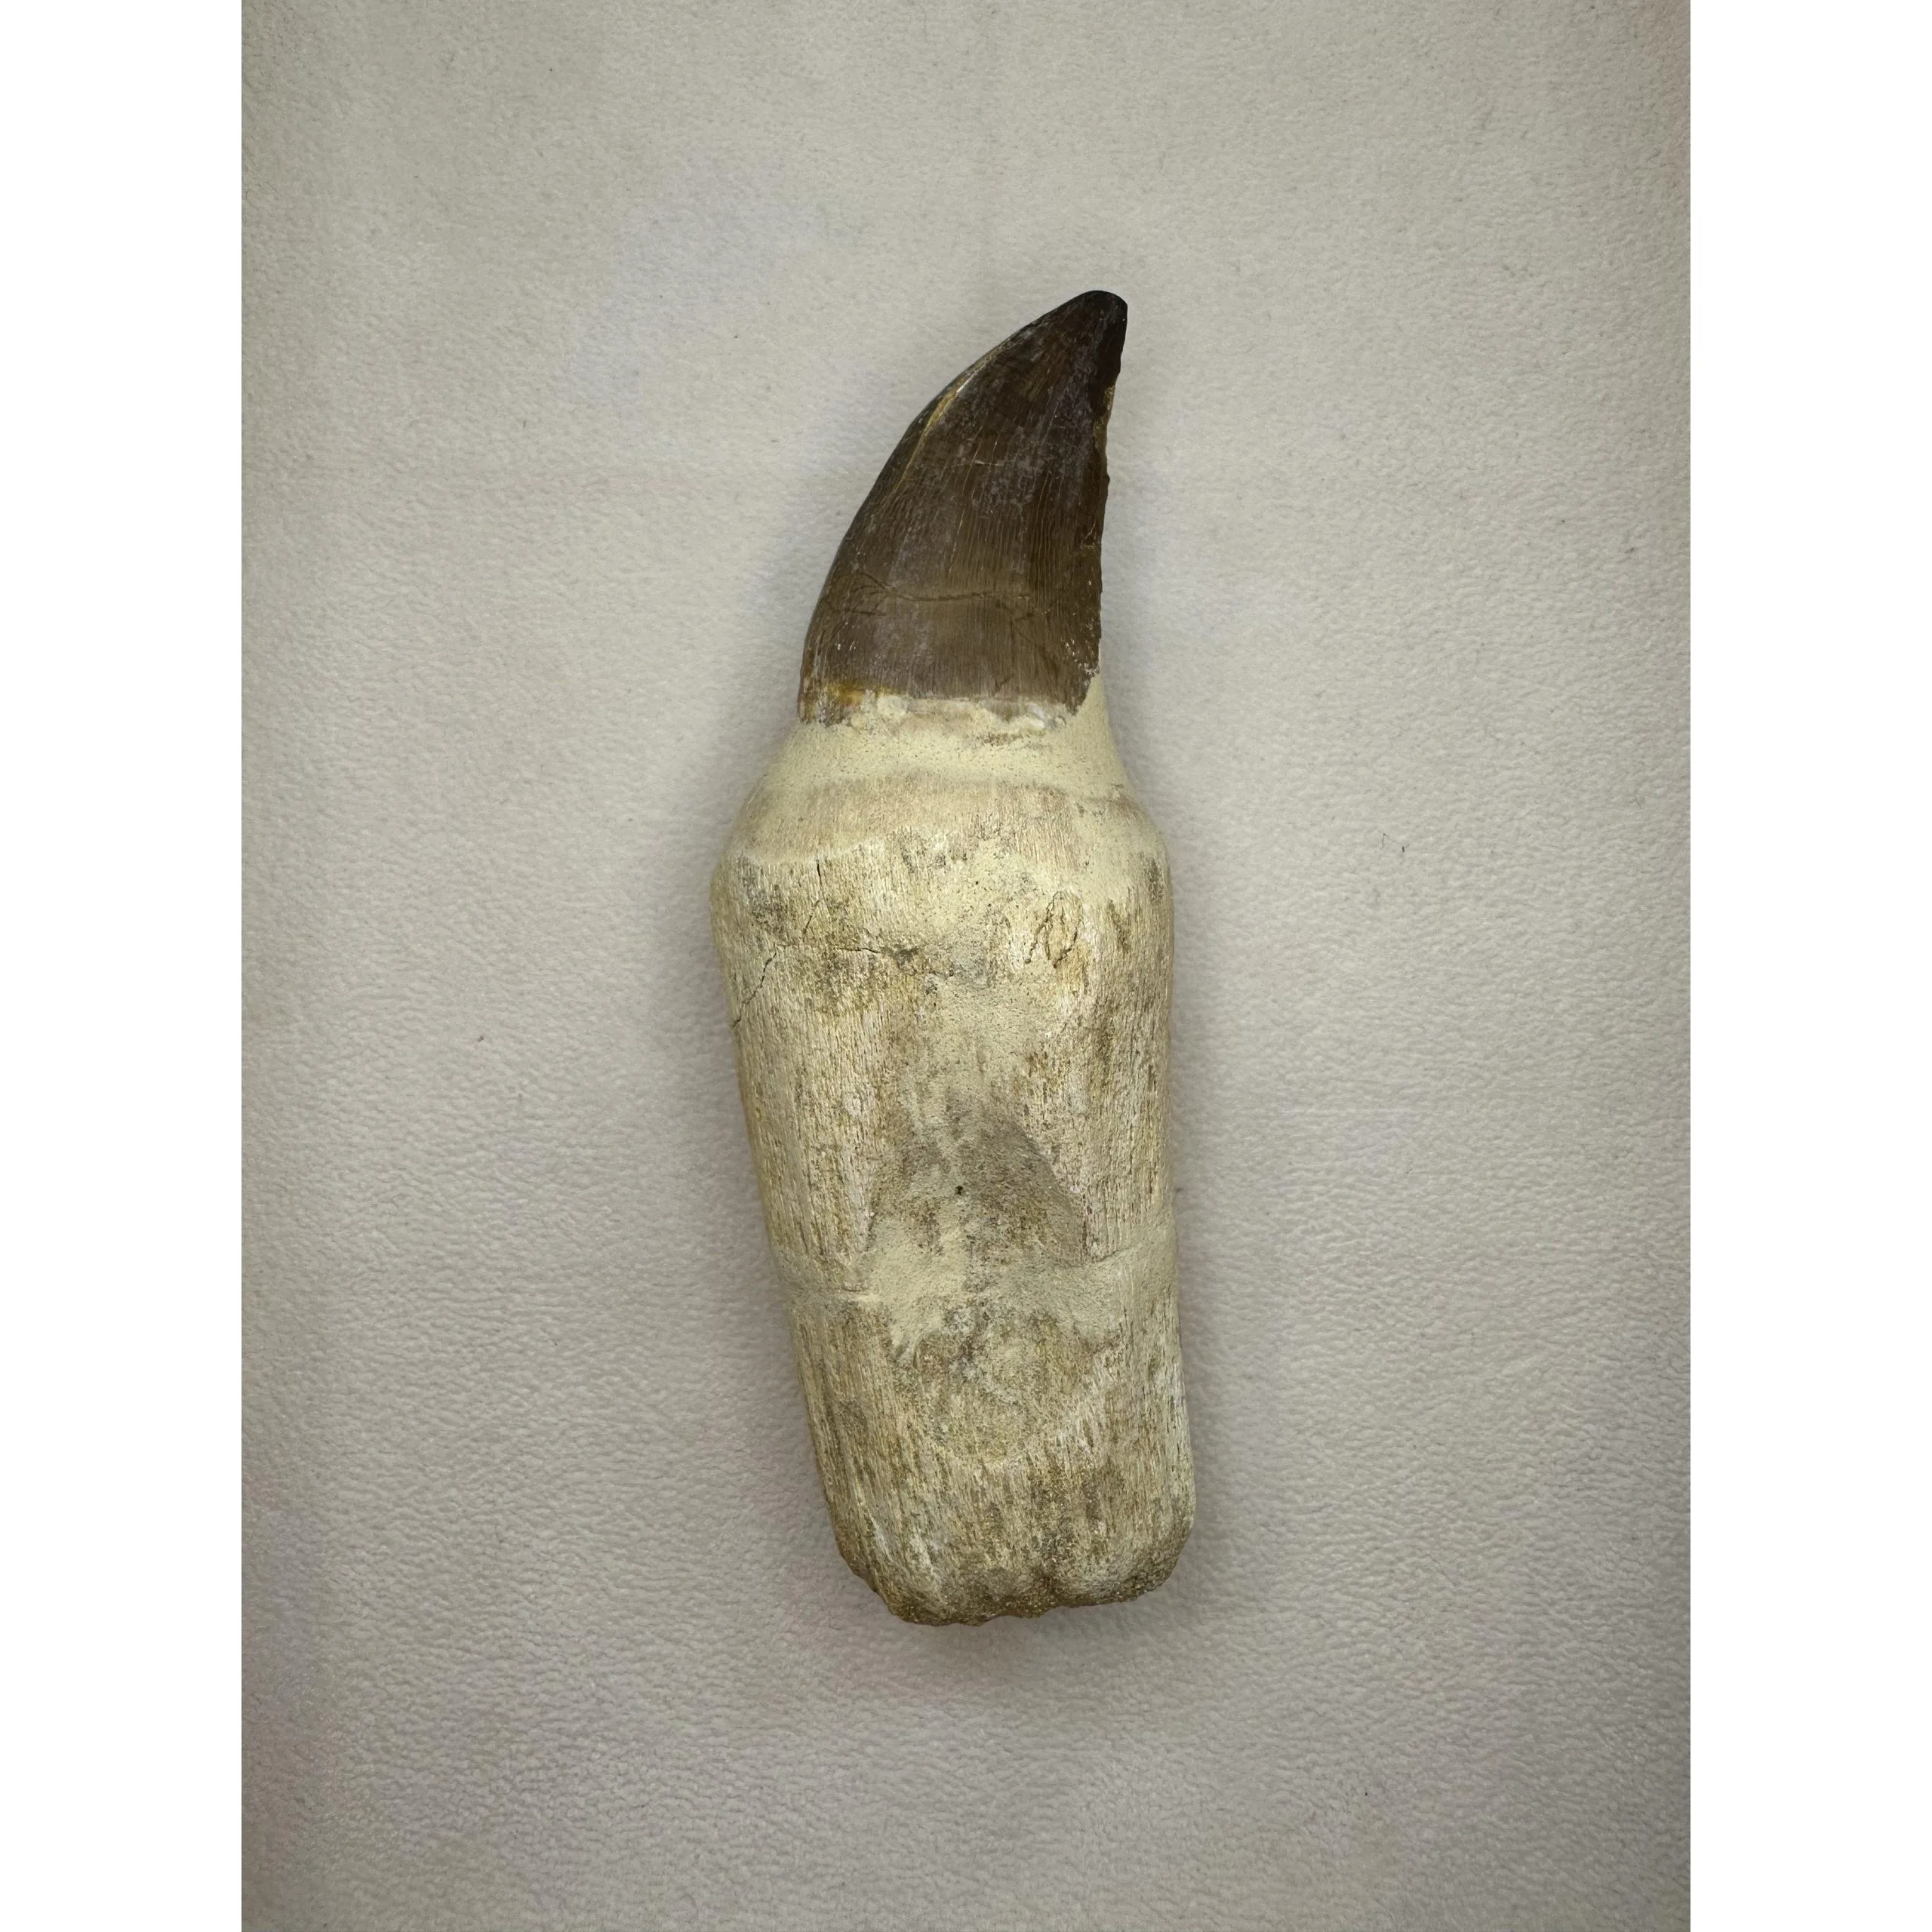 Prognathodon Anceps – Mosasaur tooth with detailed root Prehistoric Online